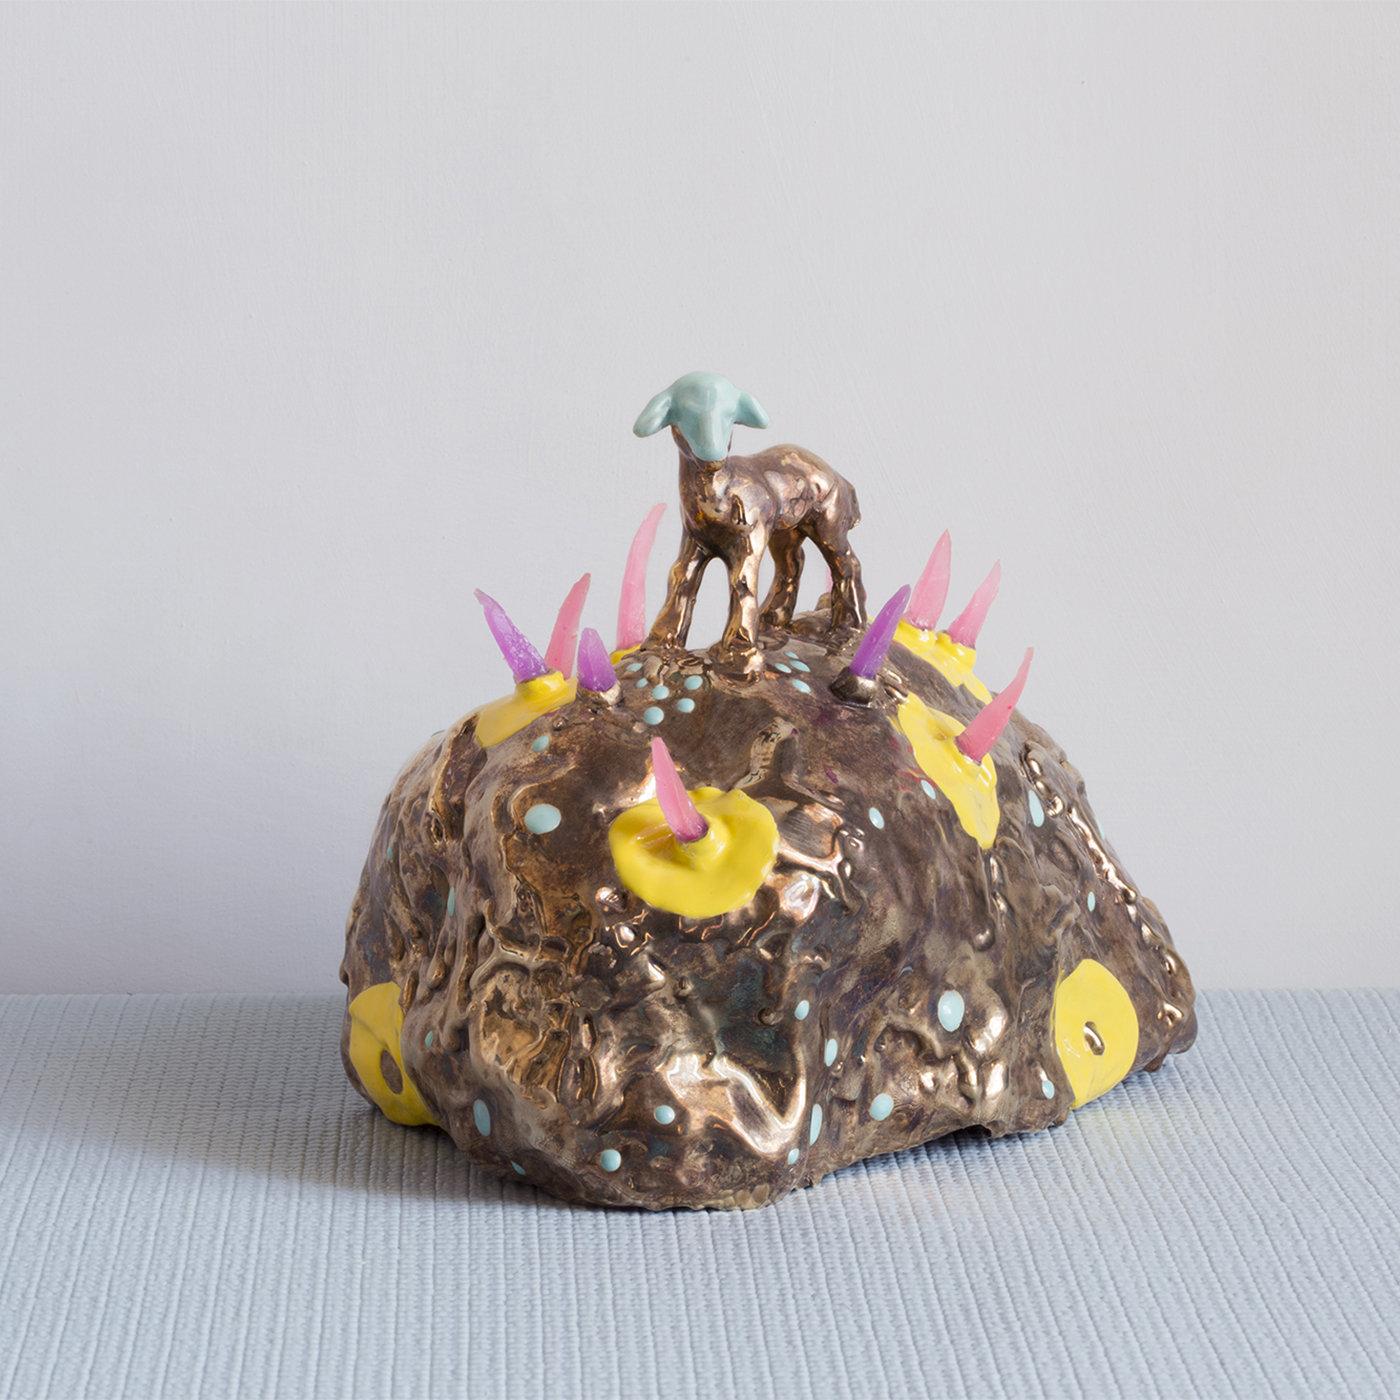 These eccentric pieces are made in total freedom and experimentation, with the addition of silicone, crystals, porcelain animals and some small remnants from production. Here, a small animal stands on a rock style surface with colored detail. A